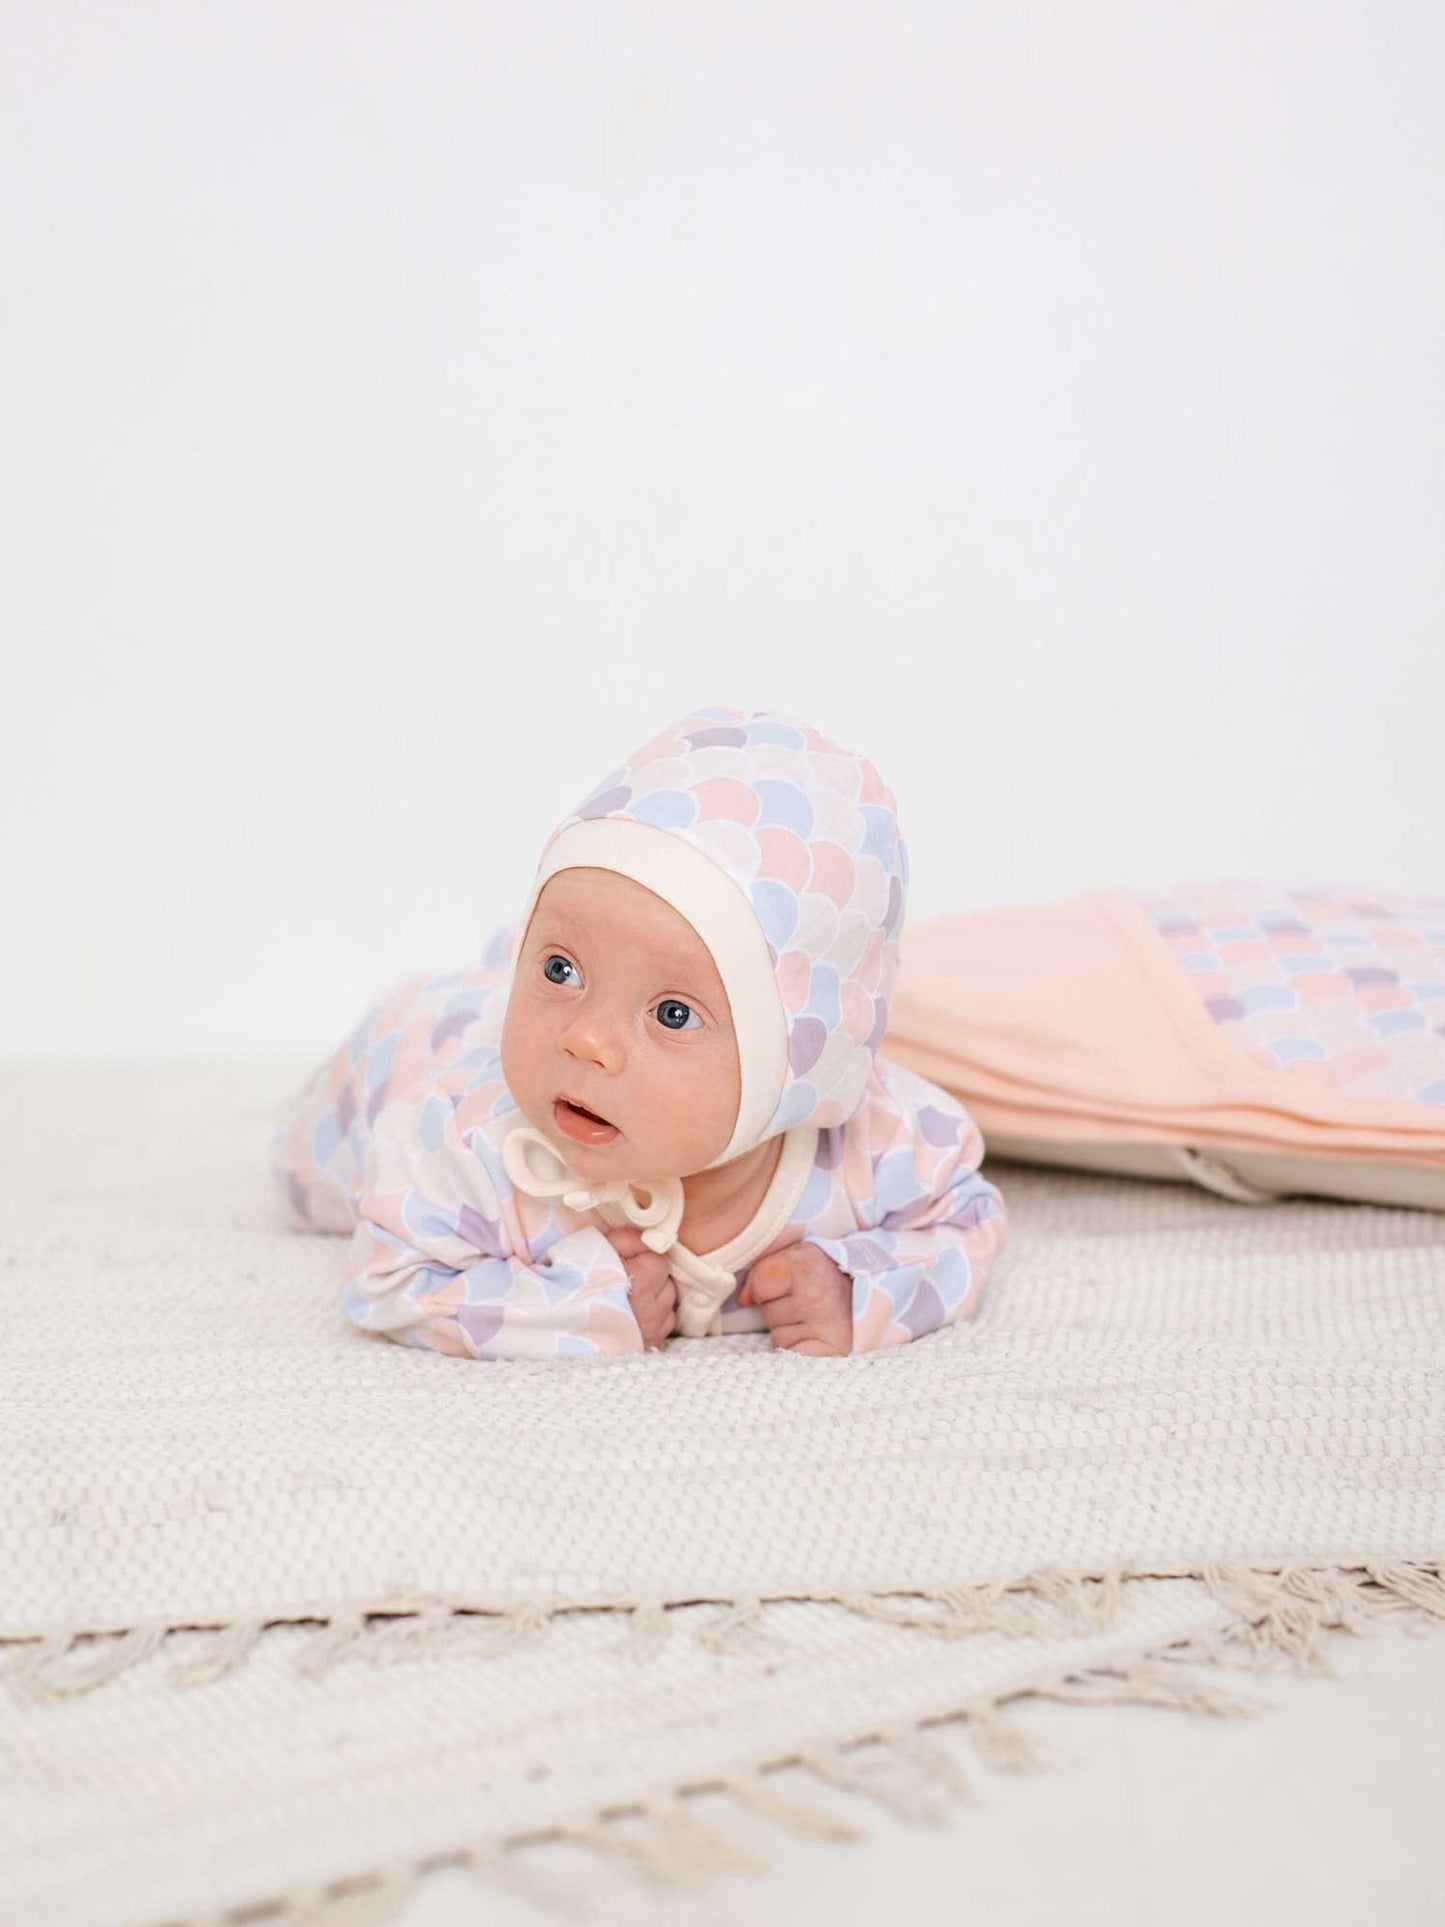 Baby Overall Gold Fish 307 is made from 100% top quality stockinette, certified OEKO-TEX Standard 100